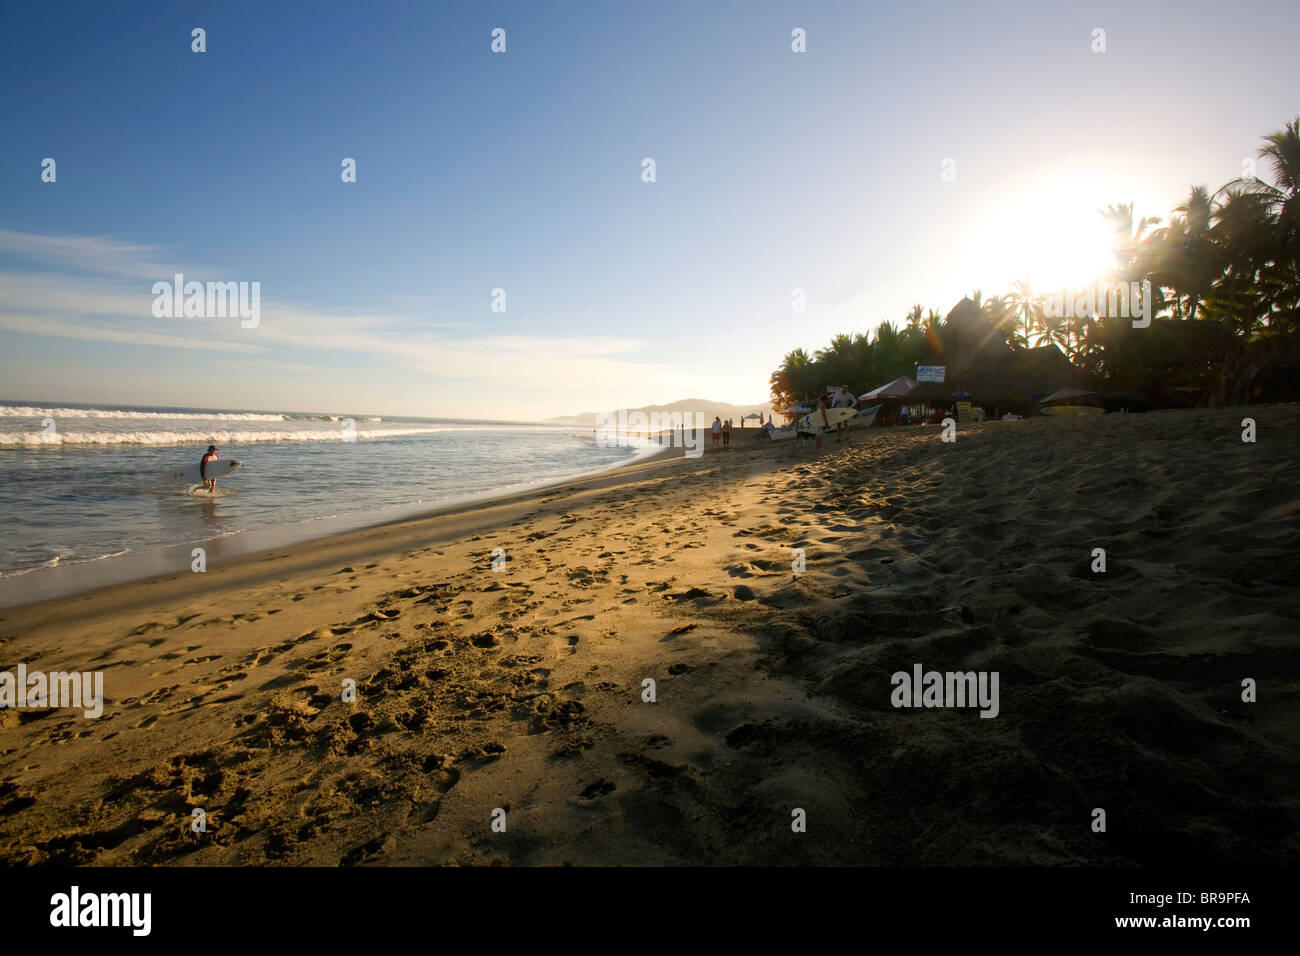 Early morning surfers on the beach in Sayulita Mexico. Stock Photo